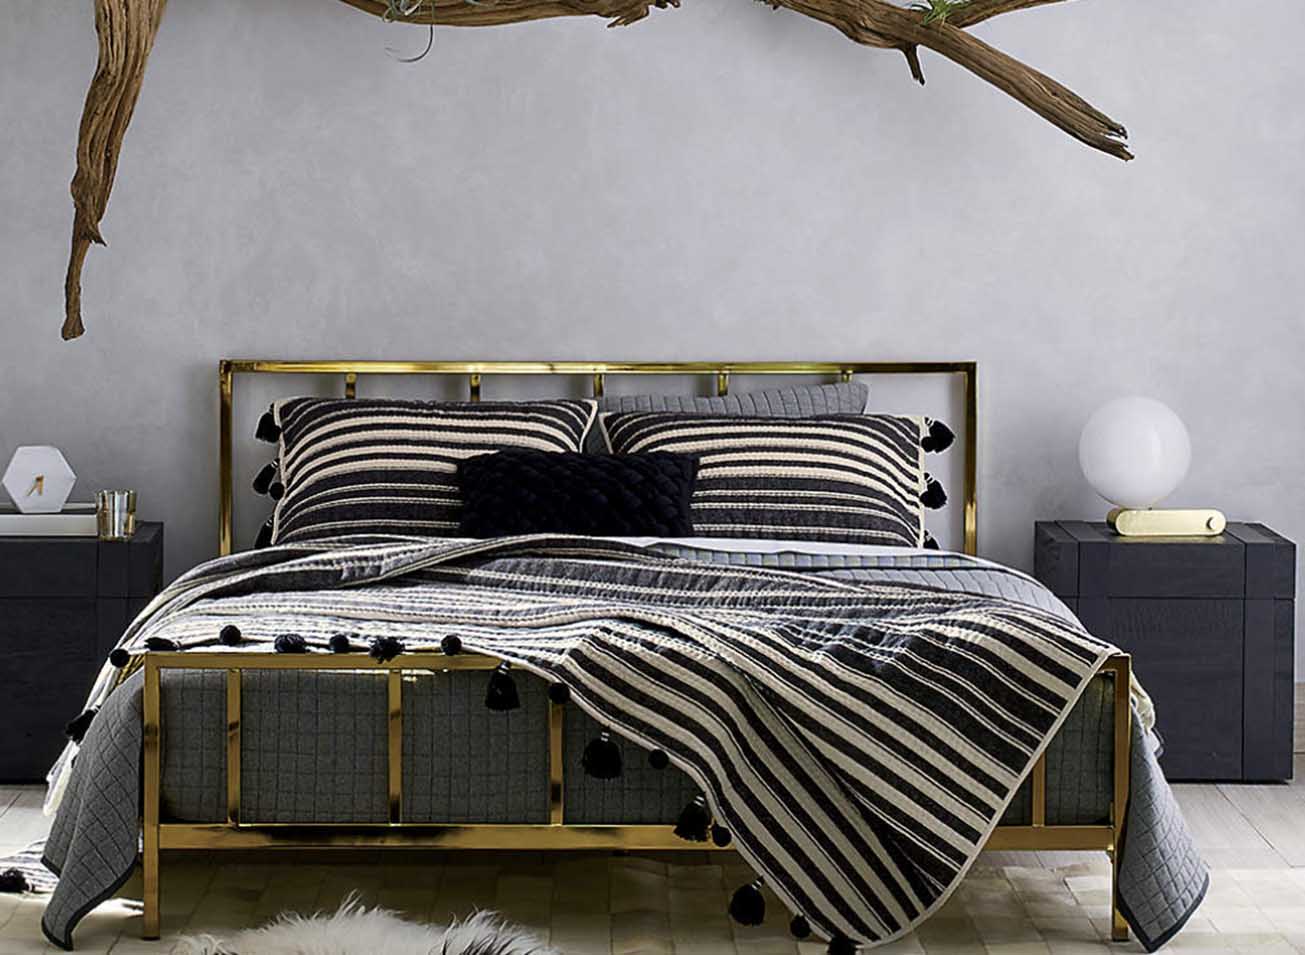 Dreamy Bed: Explore the Best Platform Beds and Create a Successful New Bedroom Frontier!